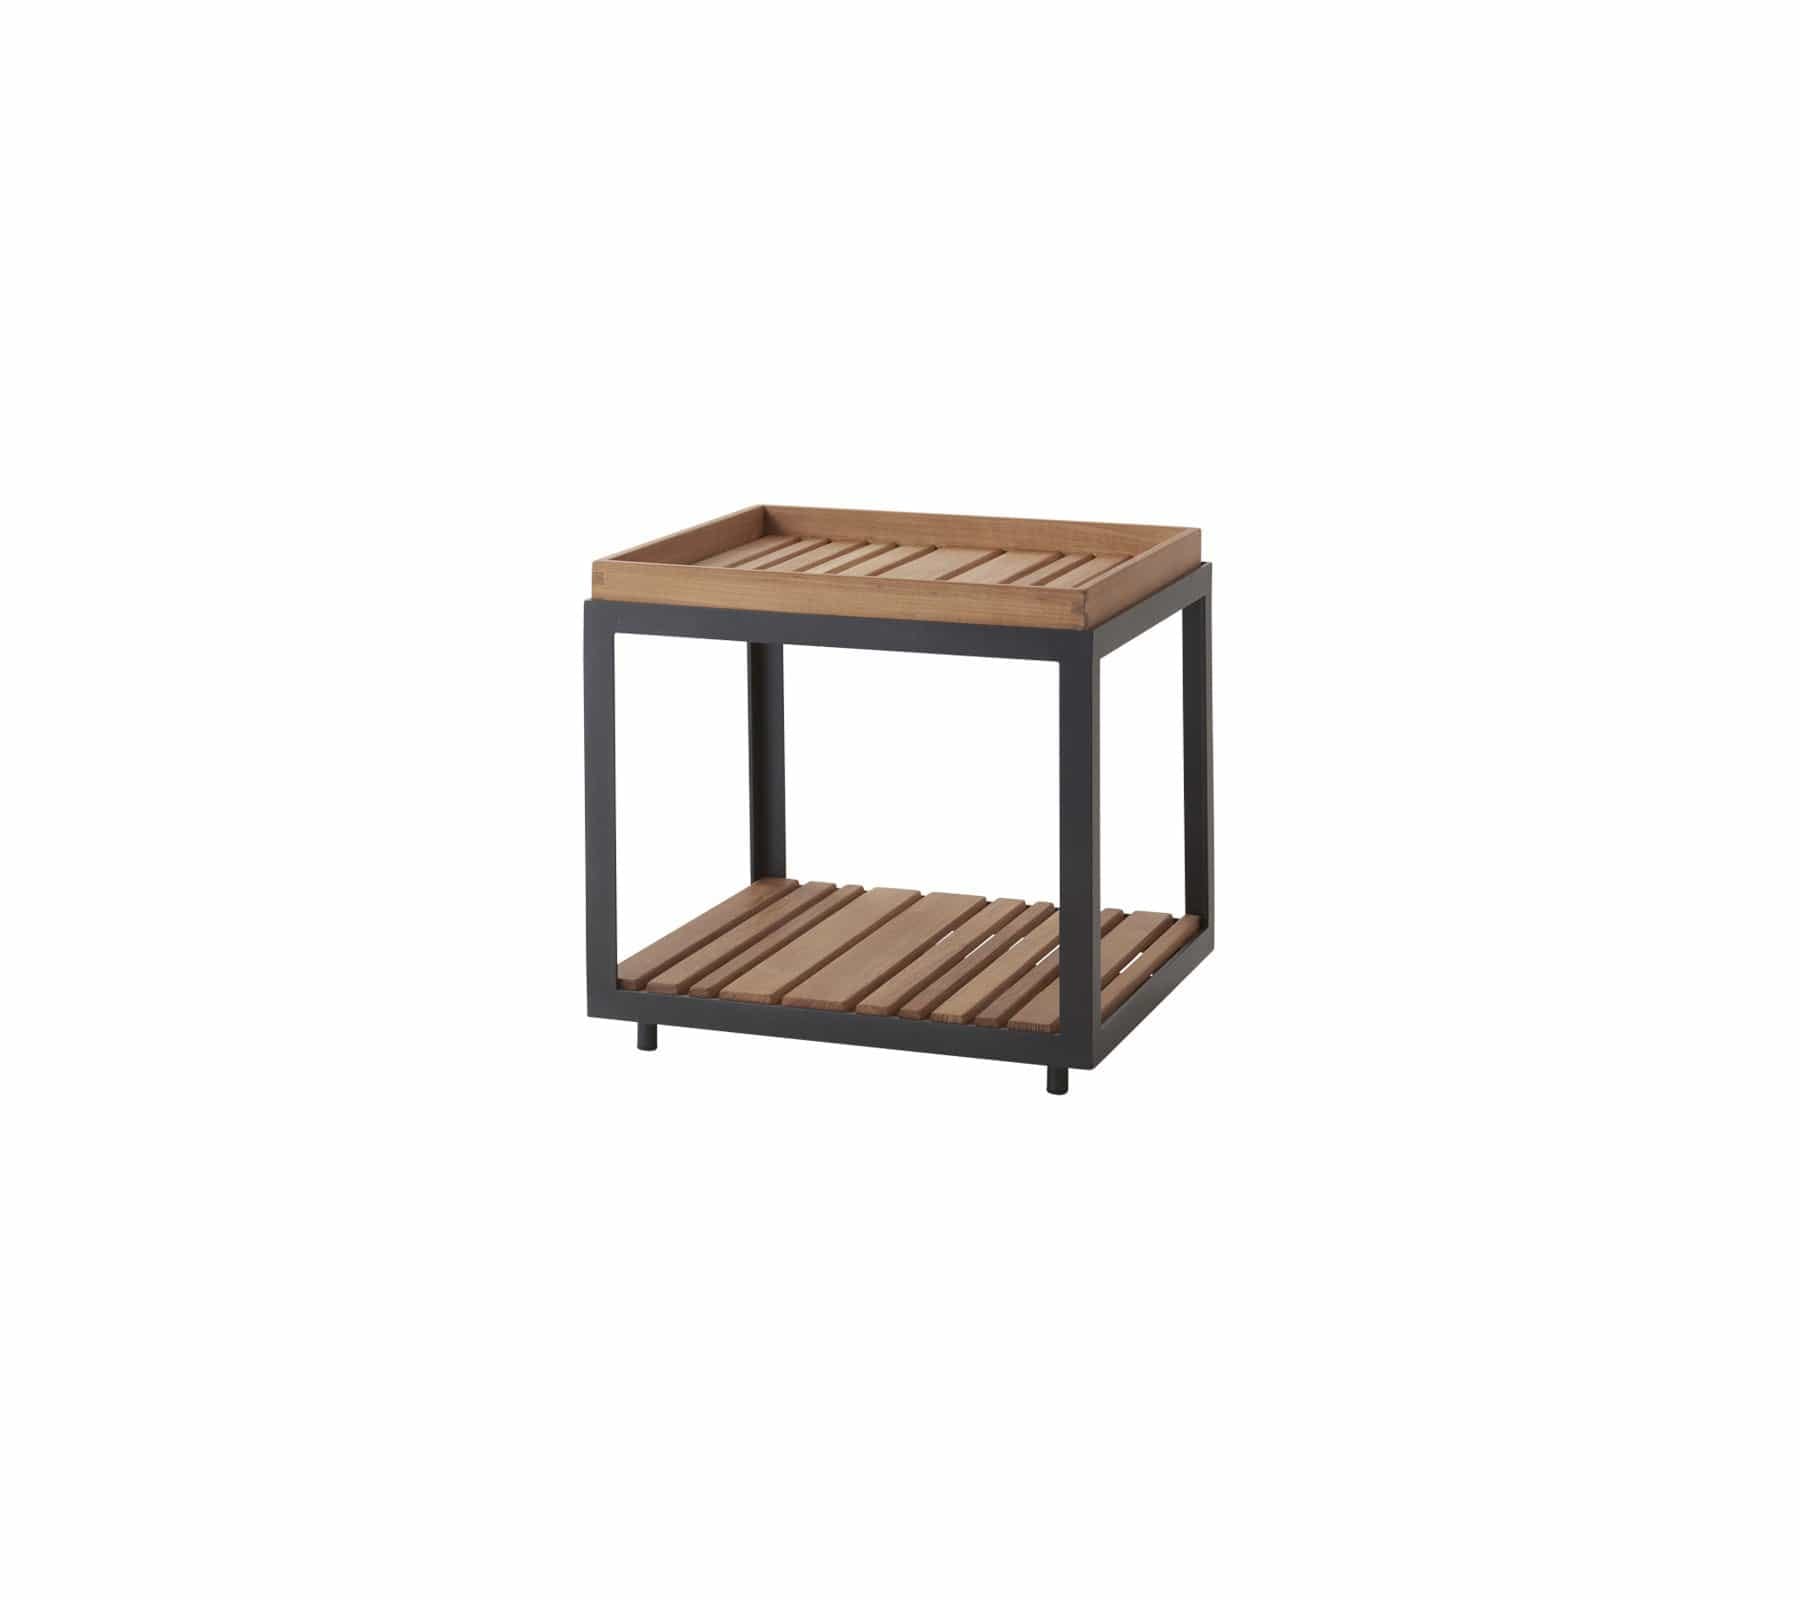 Boxhill's LEVEL Square Coffee Table Lava Grey with Teak Table Top